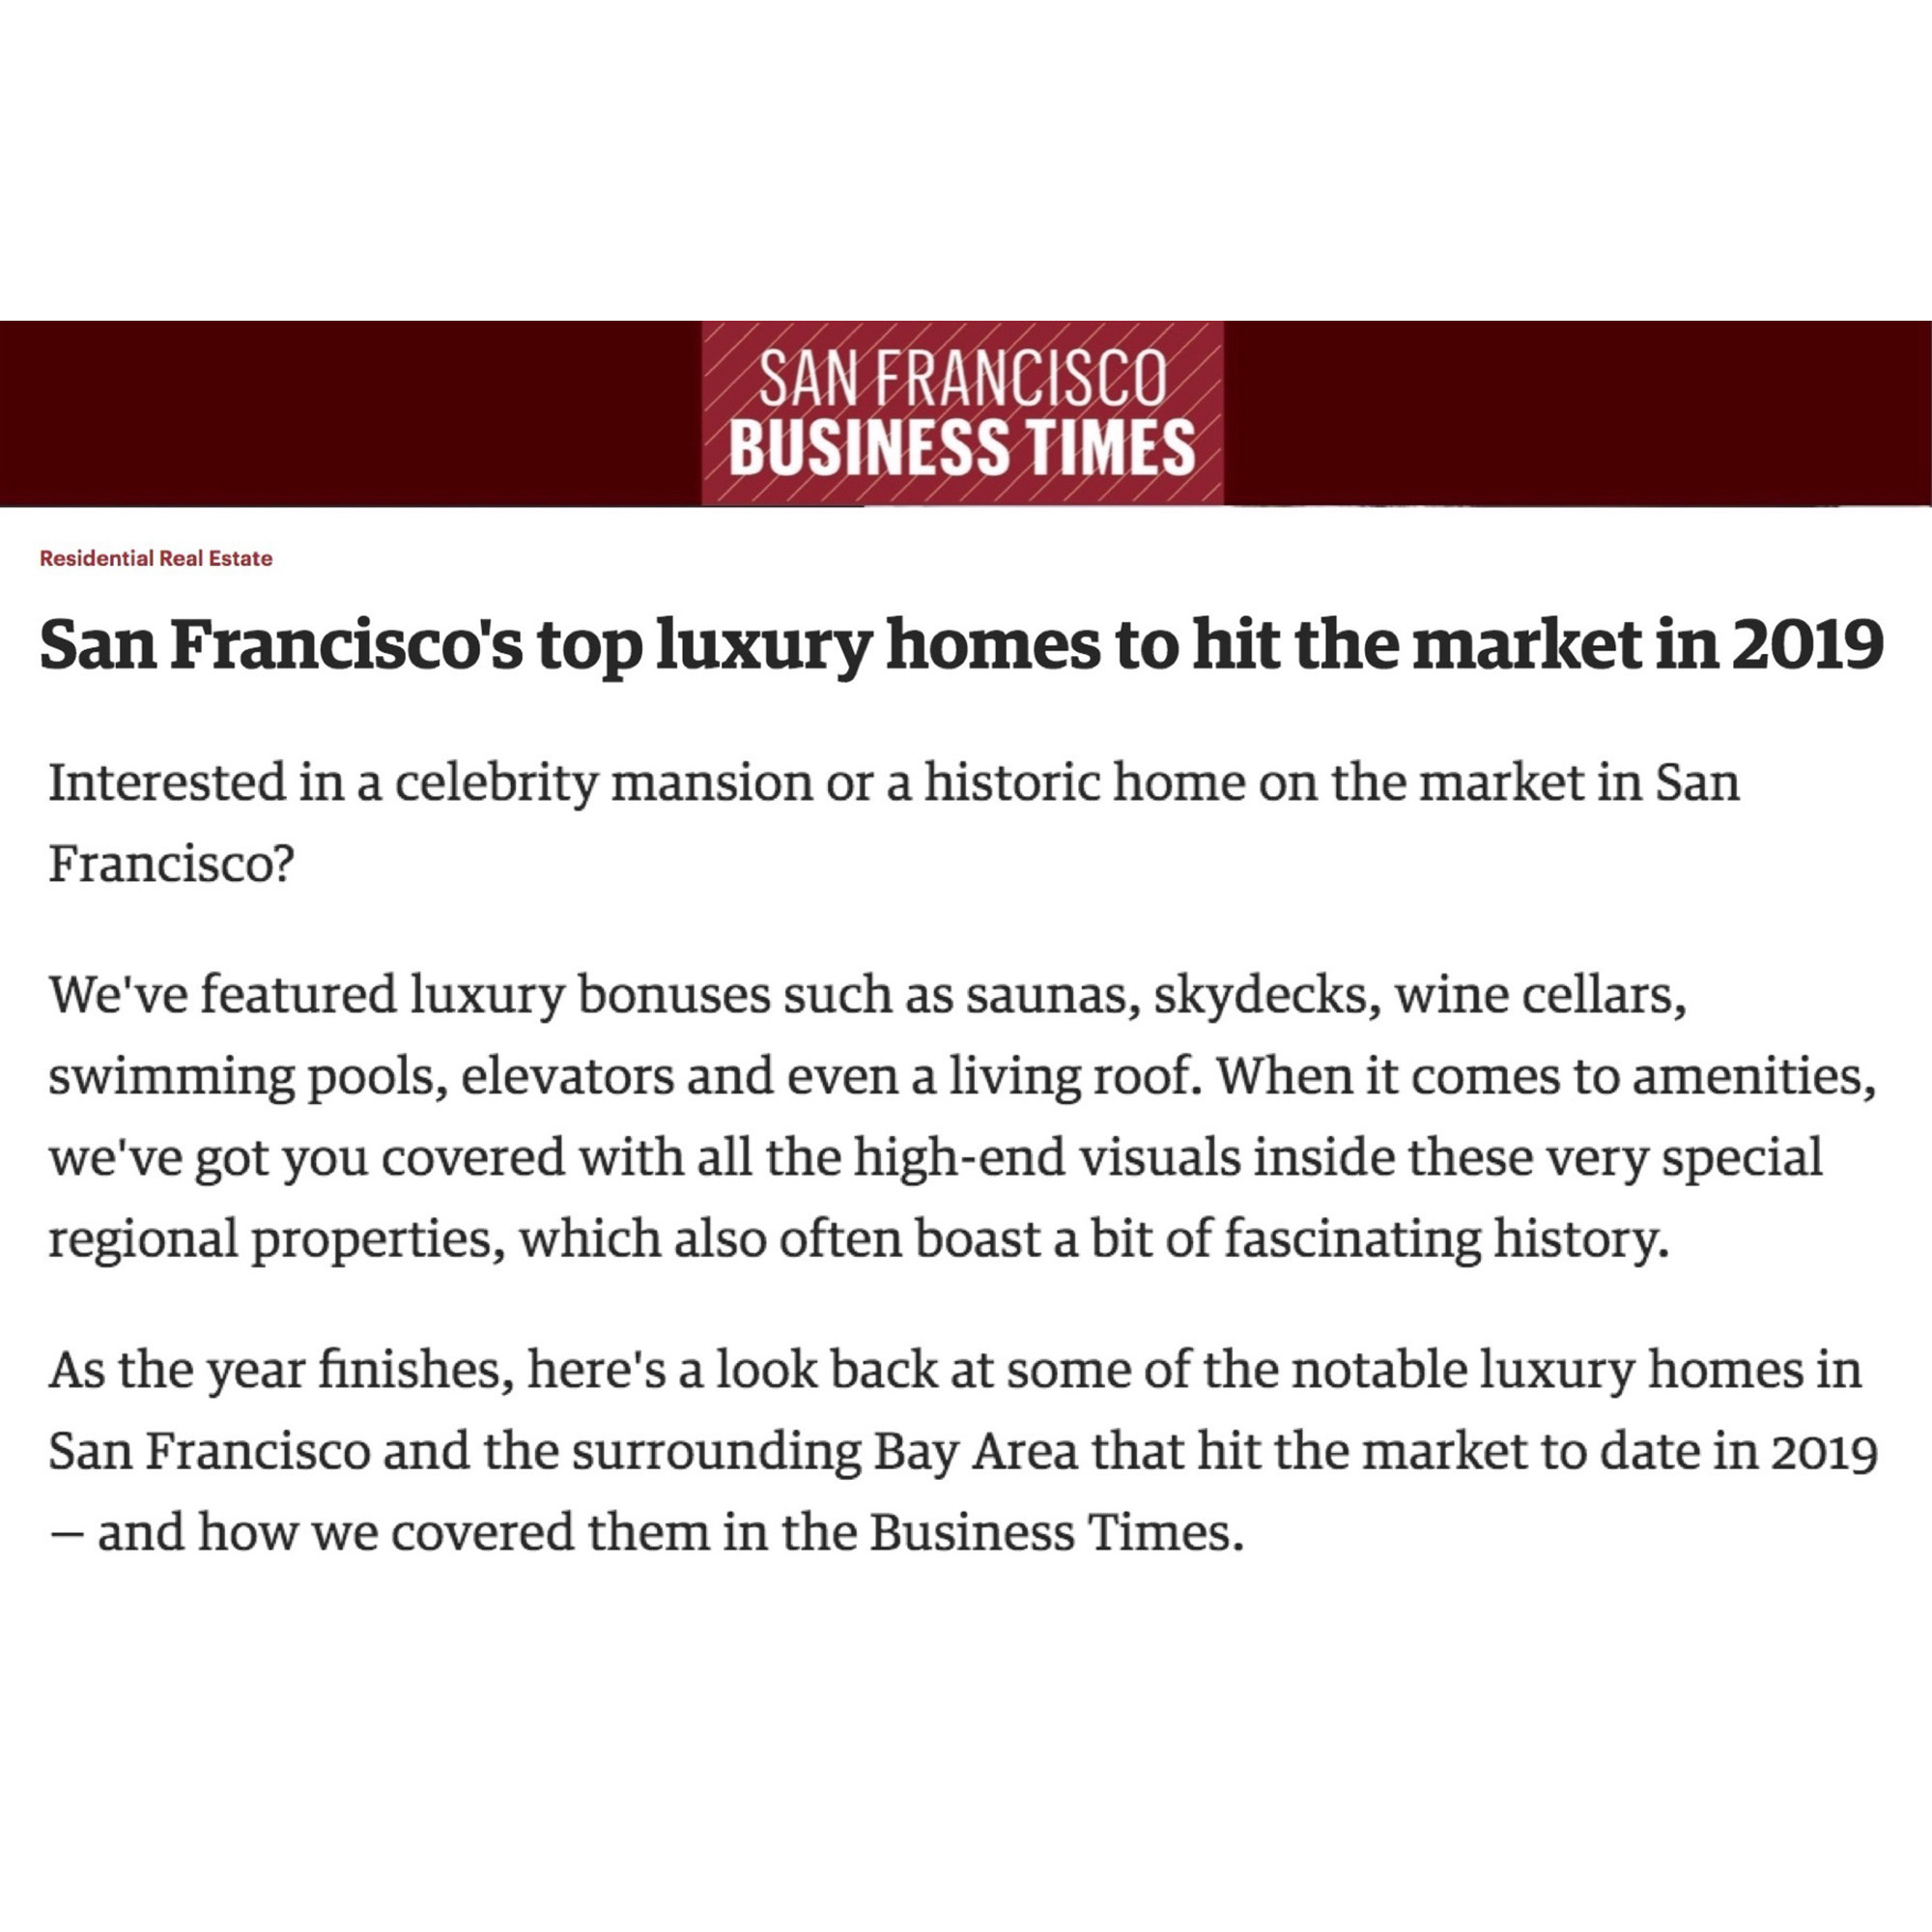 Luxury Homes to Hit the San Francisco Market